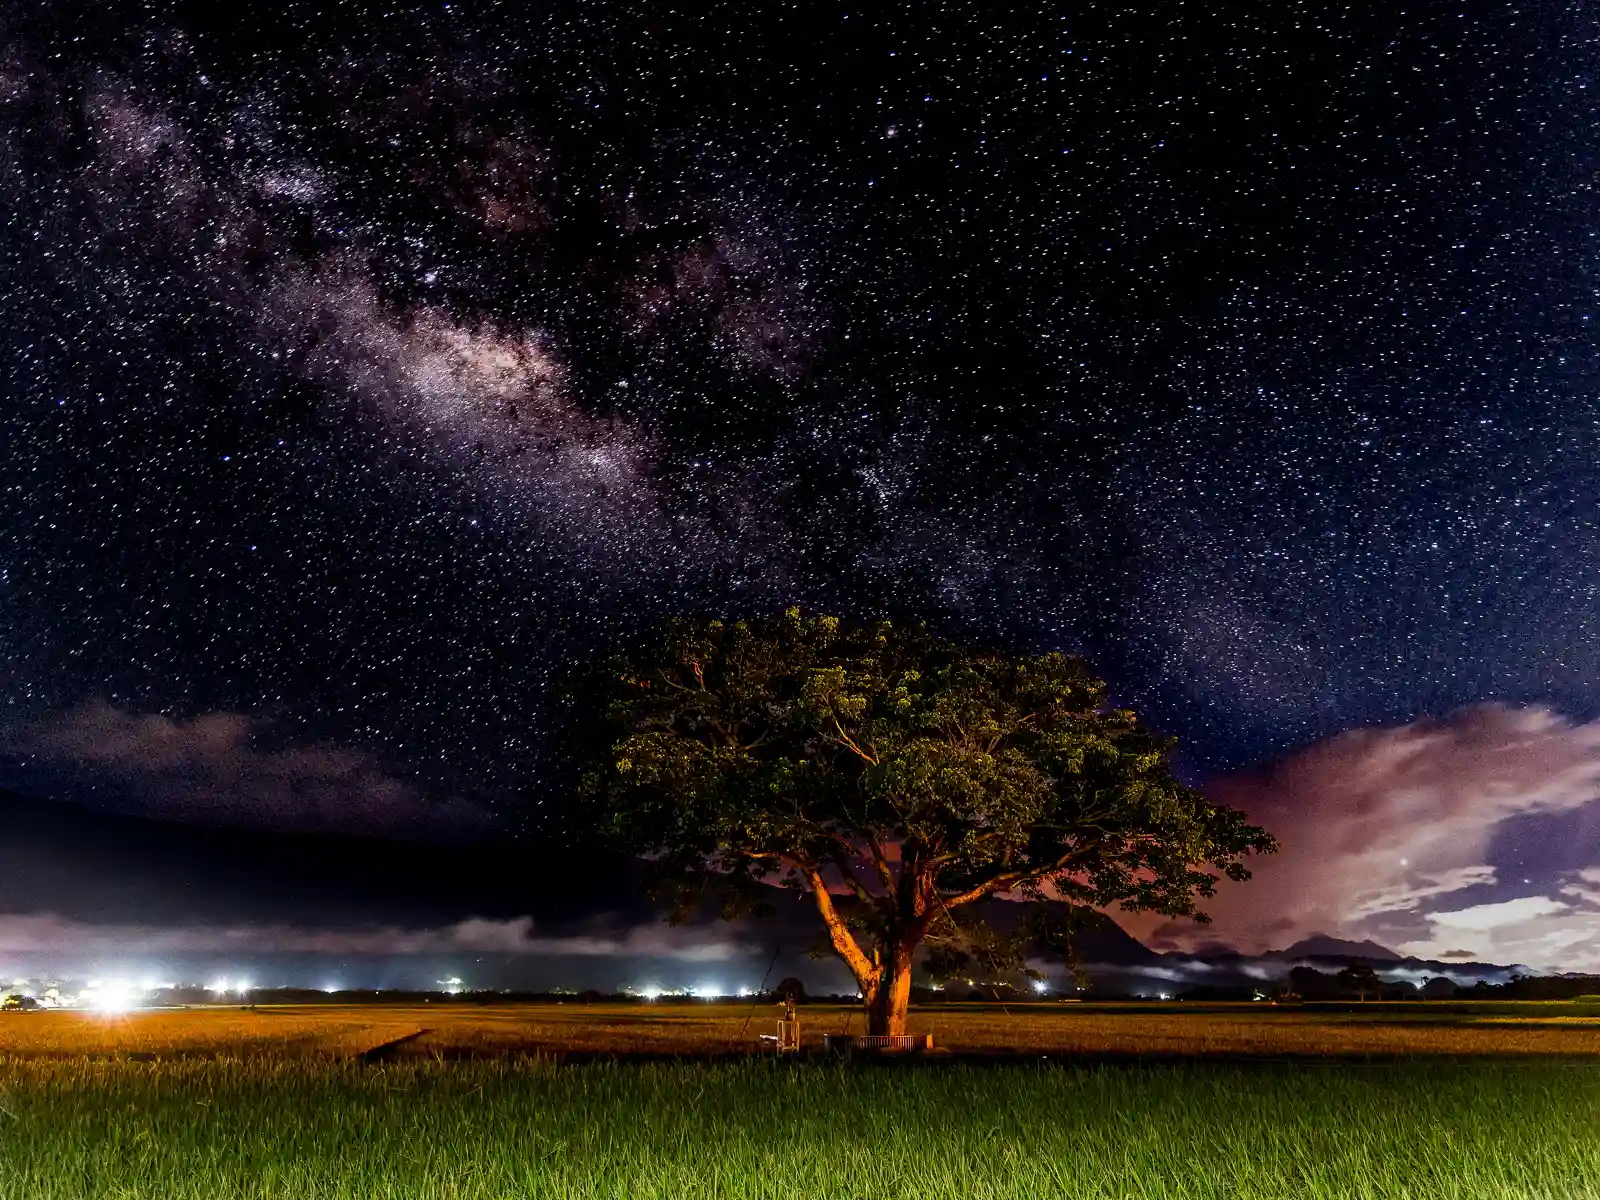 A solitary bishop wood tree can be seen in the middle of rice fields against a starry sky.